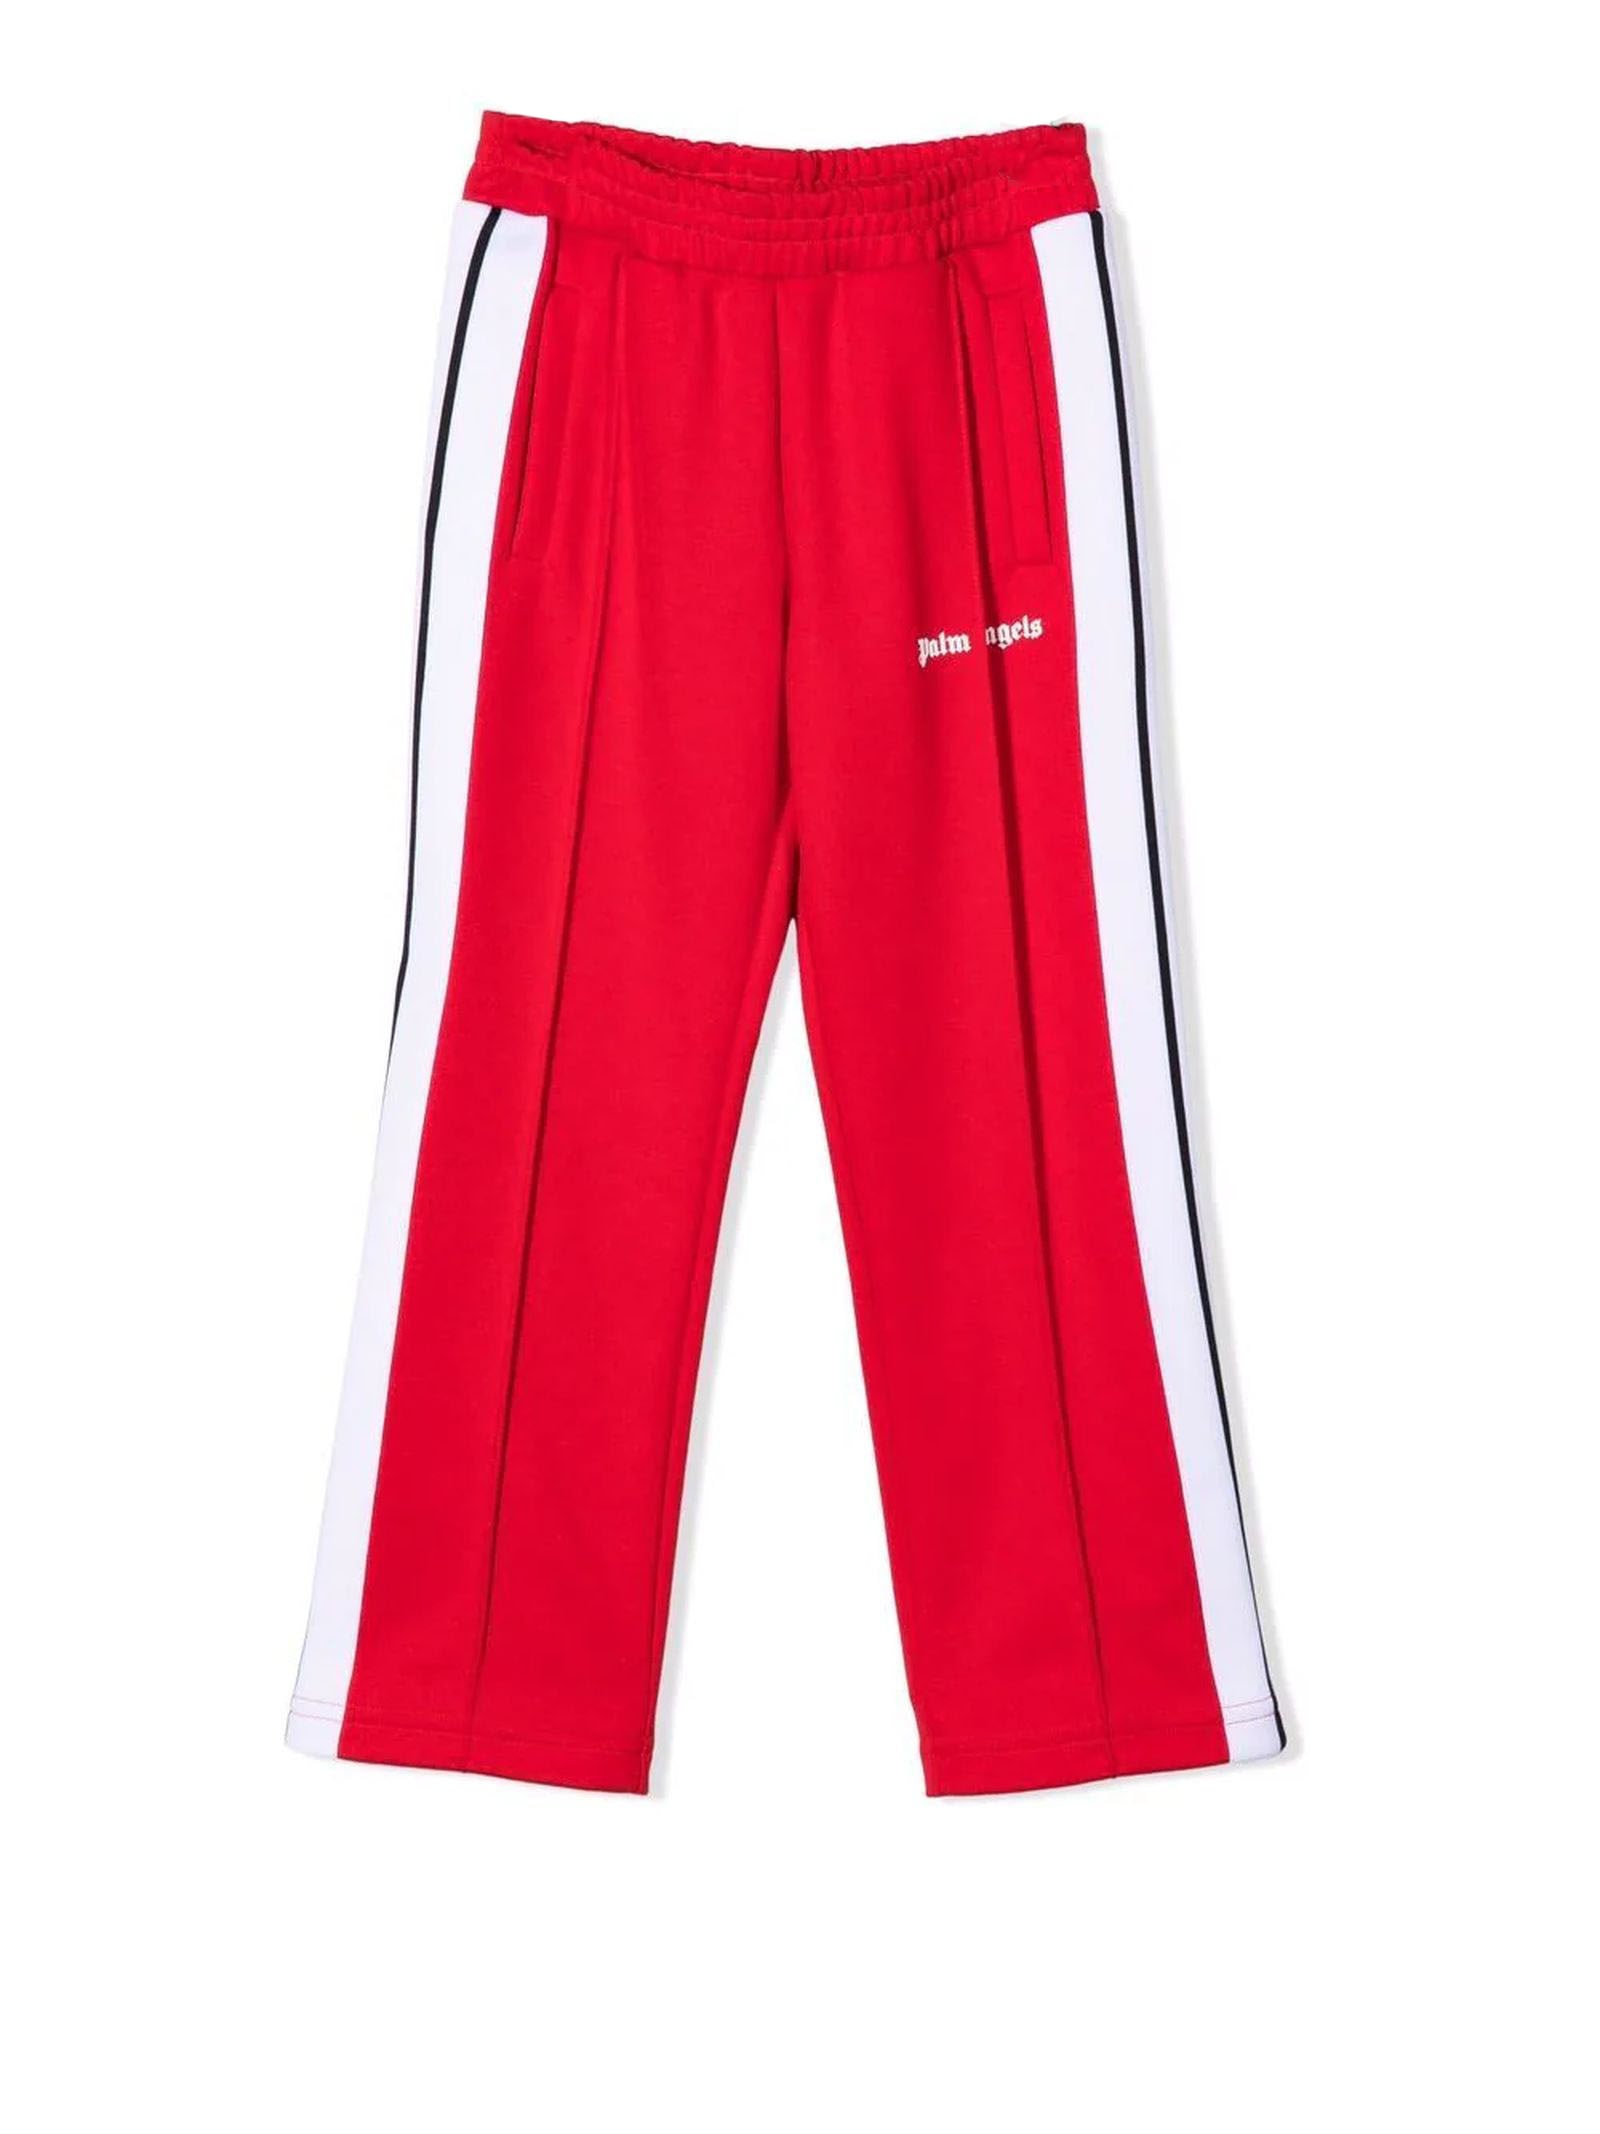 Palm Angels Red Cotton Track Pants